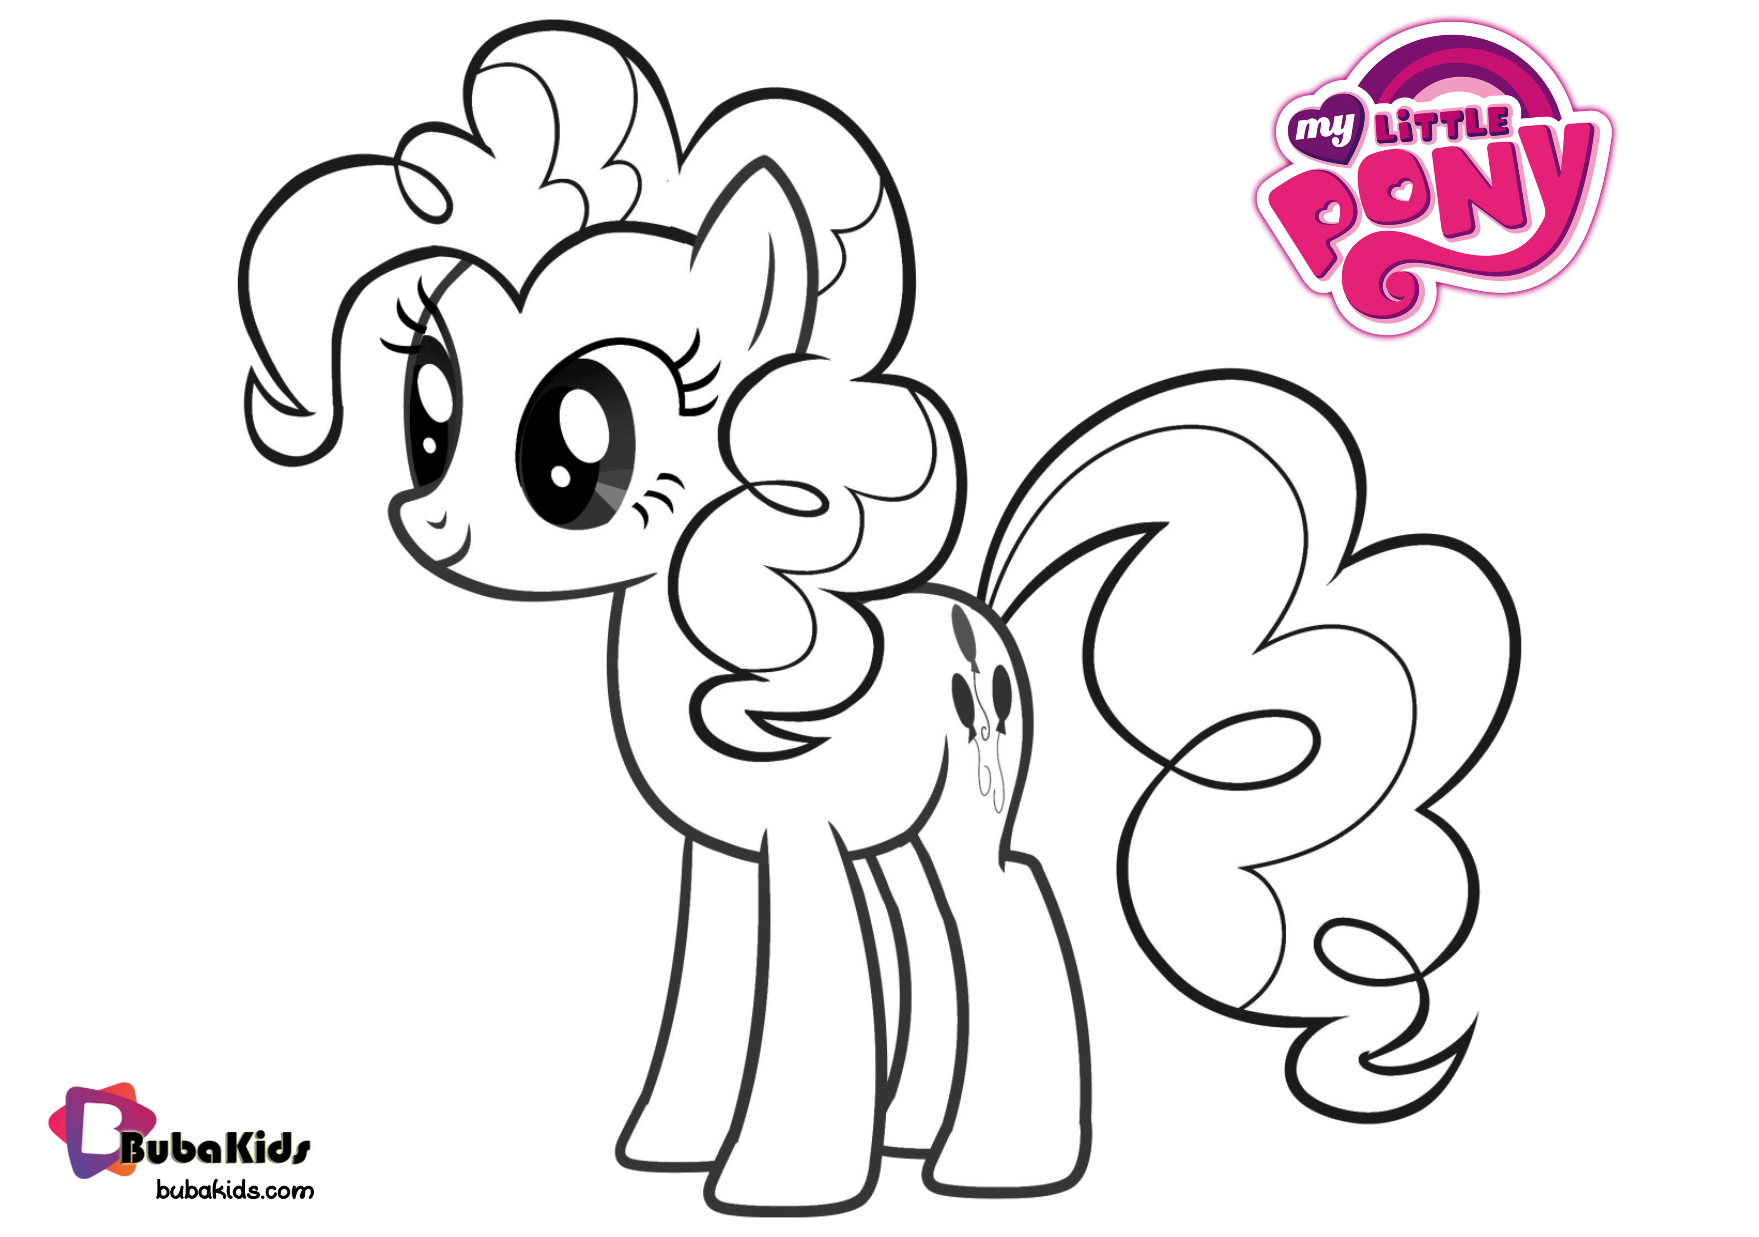 Free download my little pony coloring page. Wallpaper